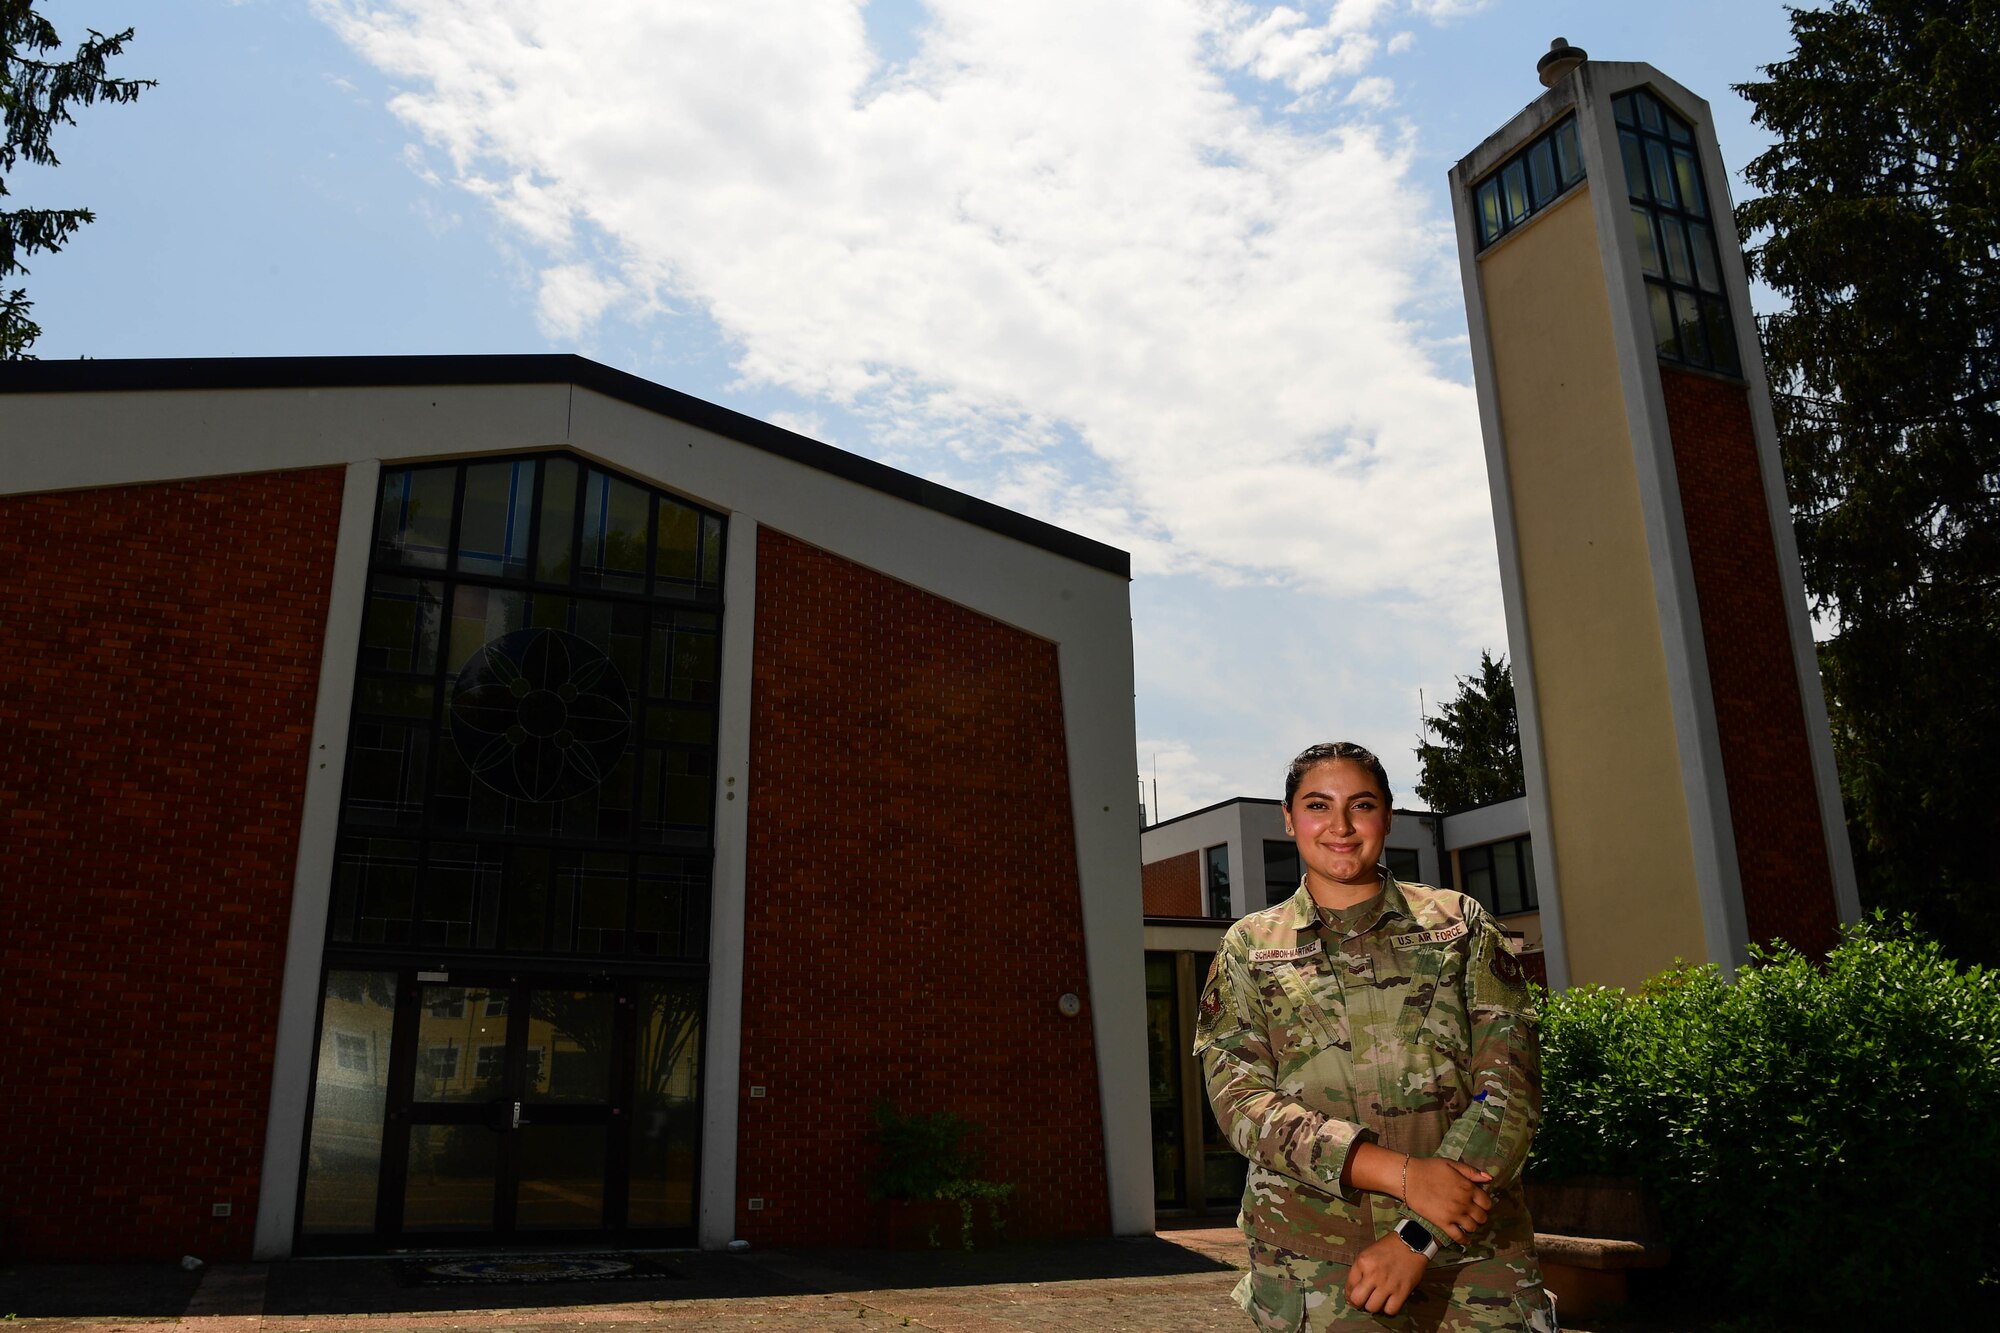 Senior Airman Nicolle Schambon Martinez, 31st Fighter Wing religious affairs journeyman, poses for a photo at Aviano Air Base, Italy, June 13, 2022. Martinez was recently awarded the U.S. Air Forces in Europe and Air Forces Africa Religious Affairs Airman of the Year. (U.S. Air Force photo by Senior Airman Noah Sudolcan)